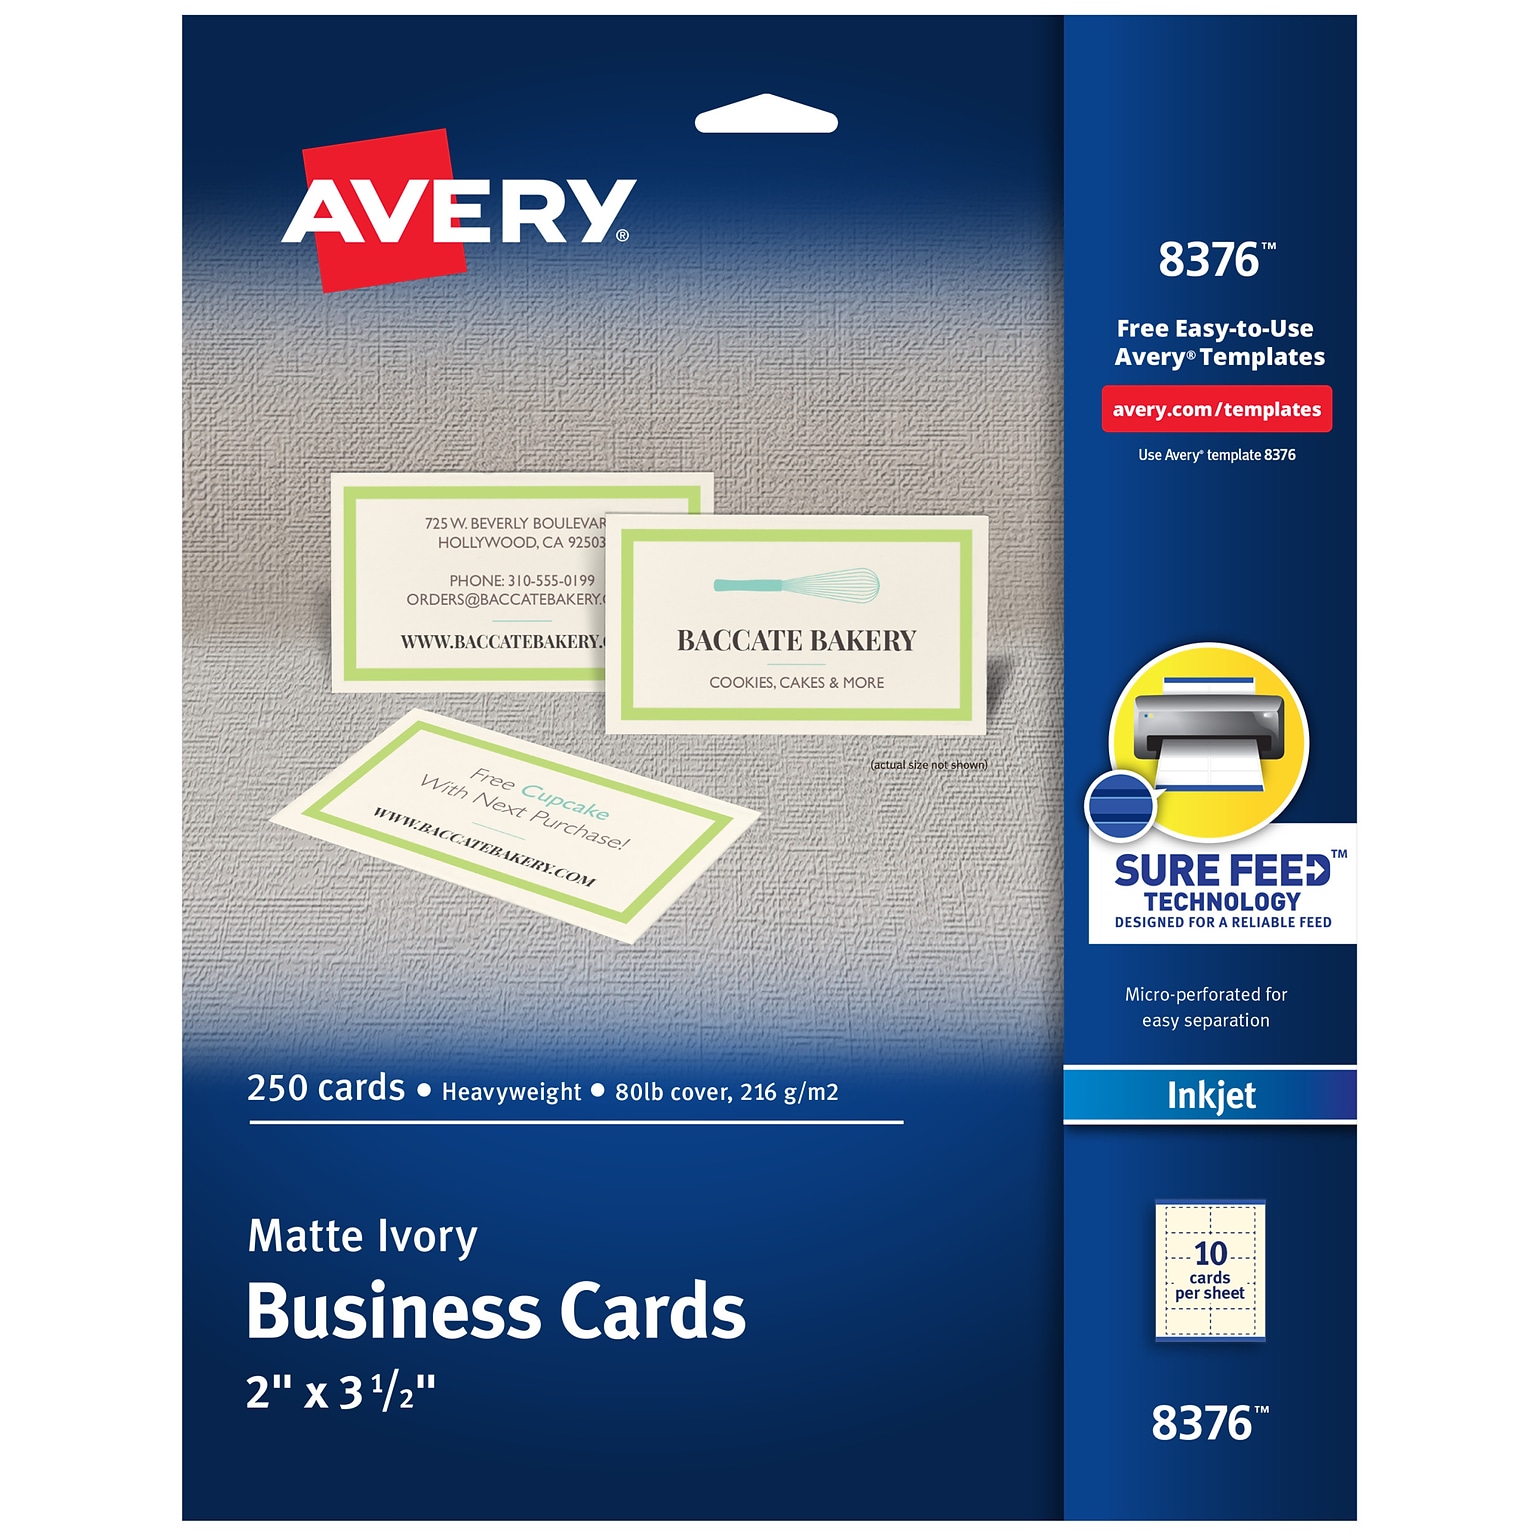 Avery Microperforated Business Cards, 2 x 3 1/2, Matte Ivory, 250 Per Pack (8376)